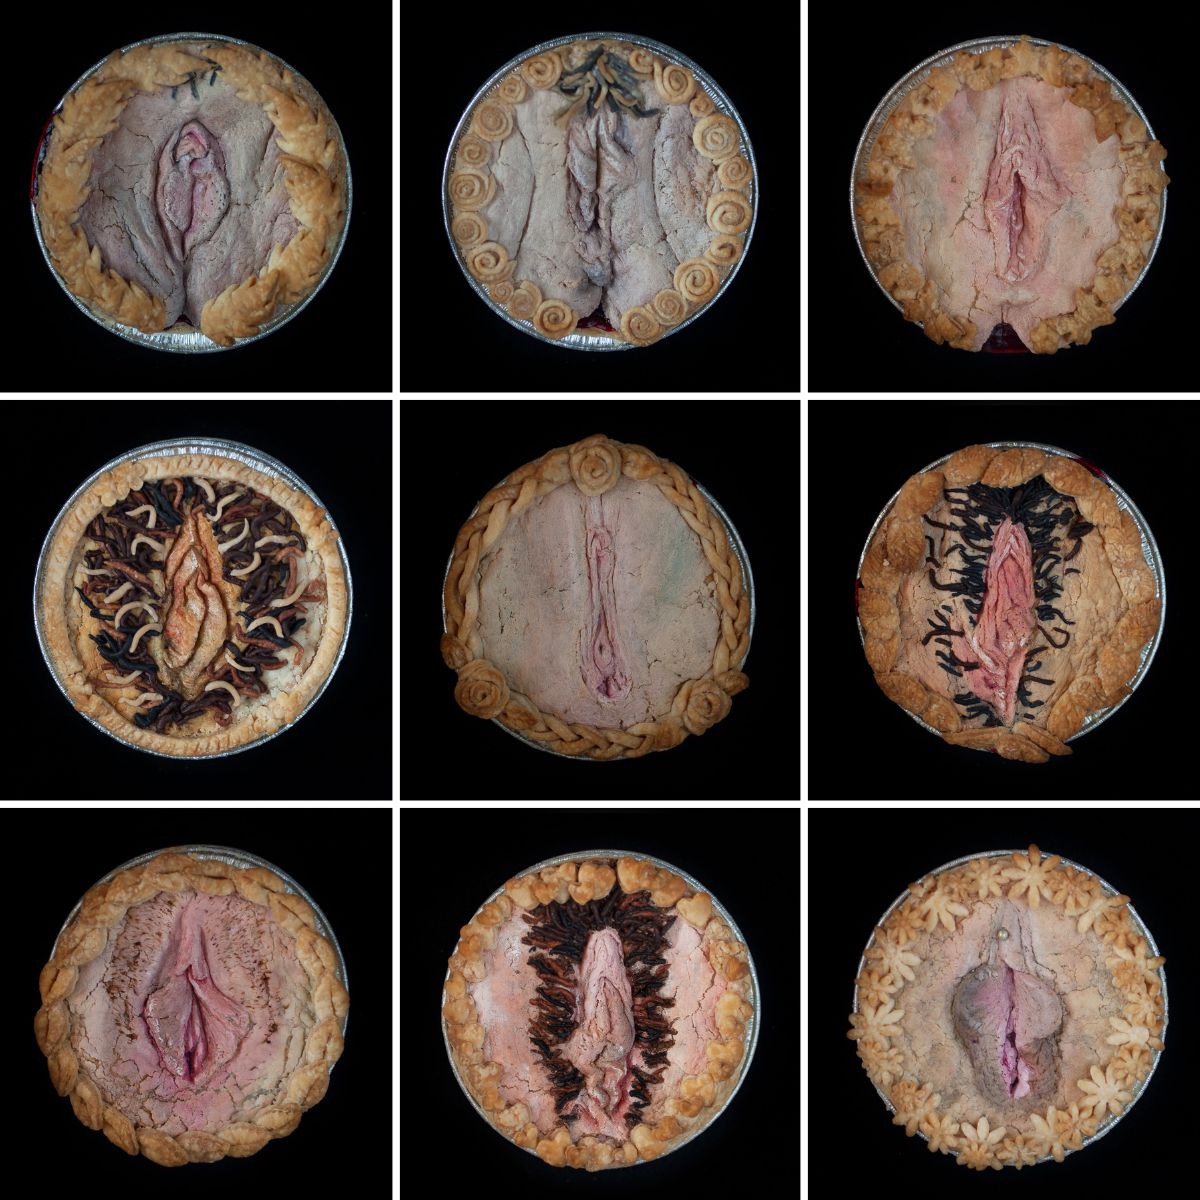 9 baked vulva pies on black background. Each pie has a different, diverse vulva and pubic hair style. 